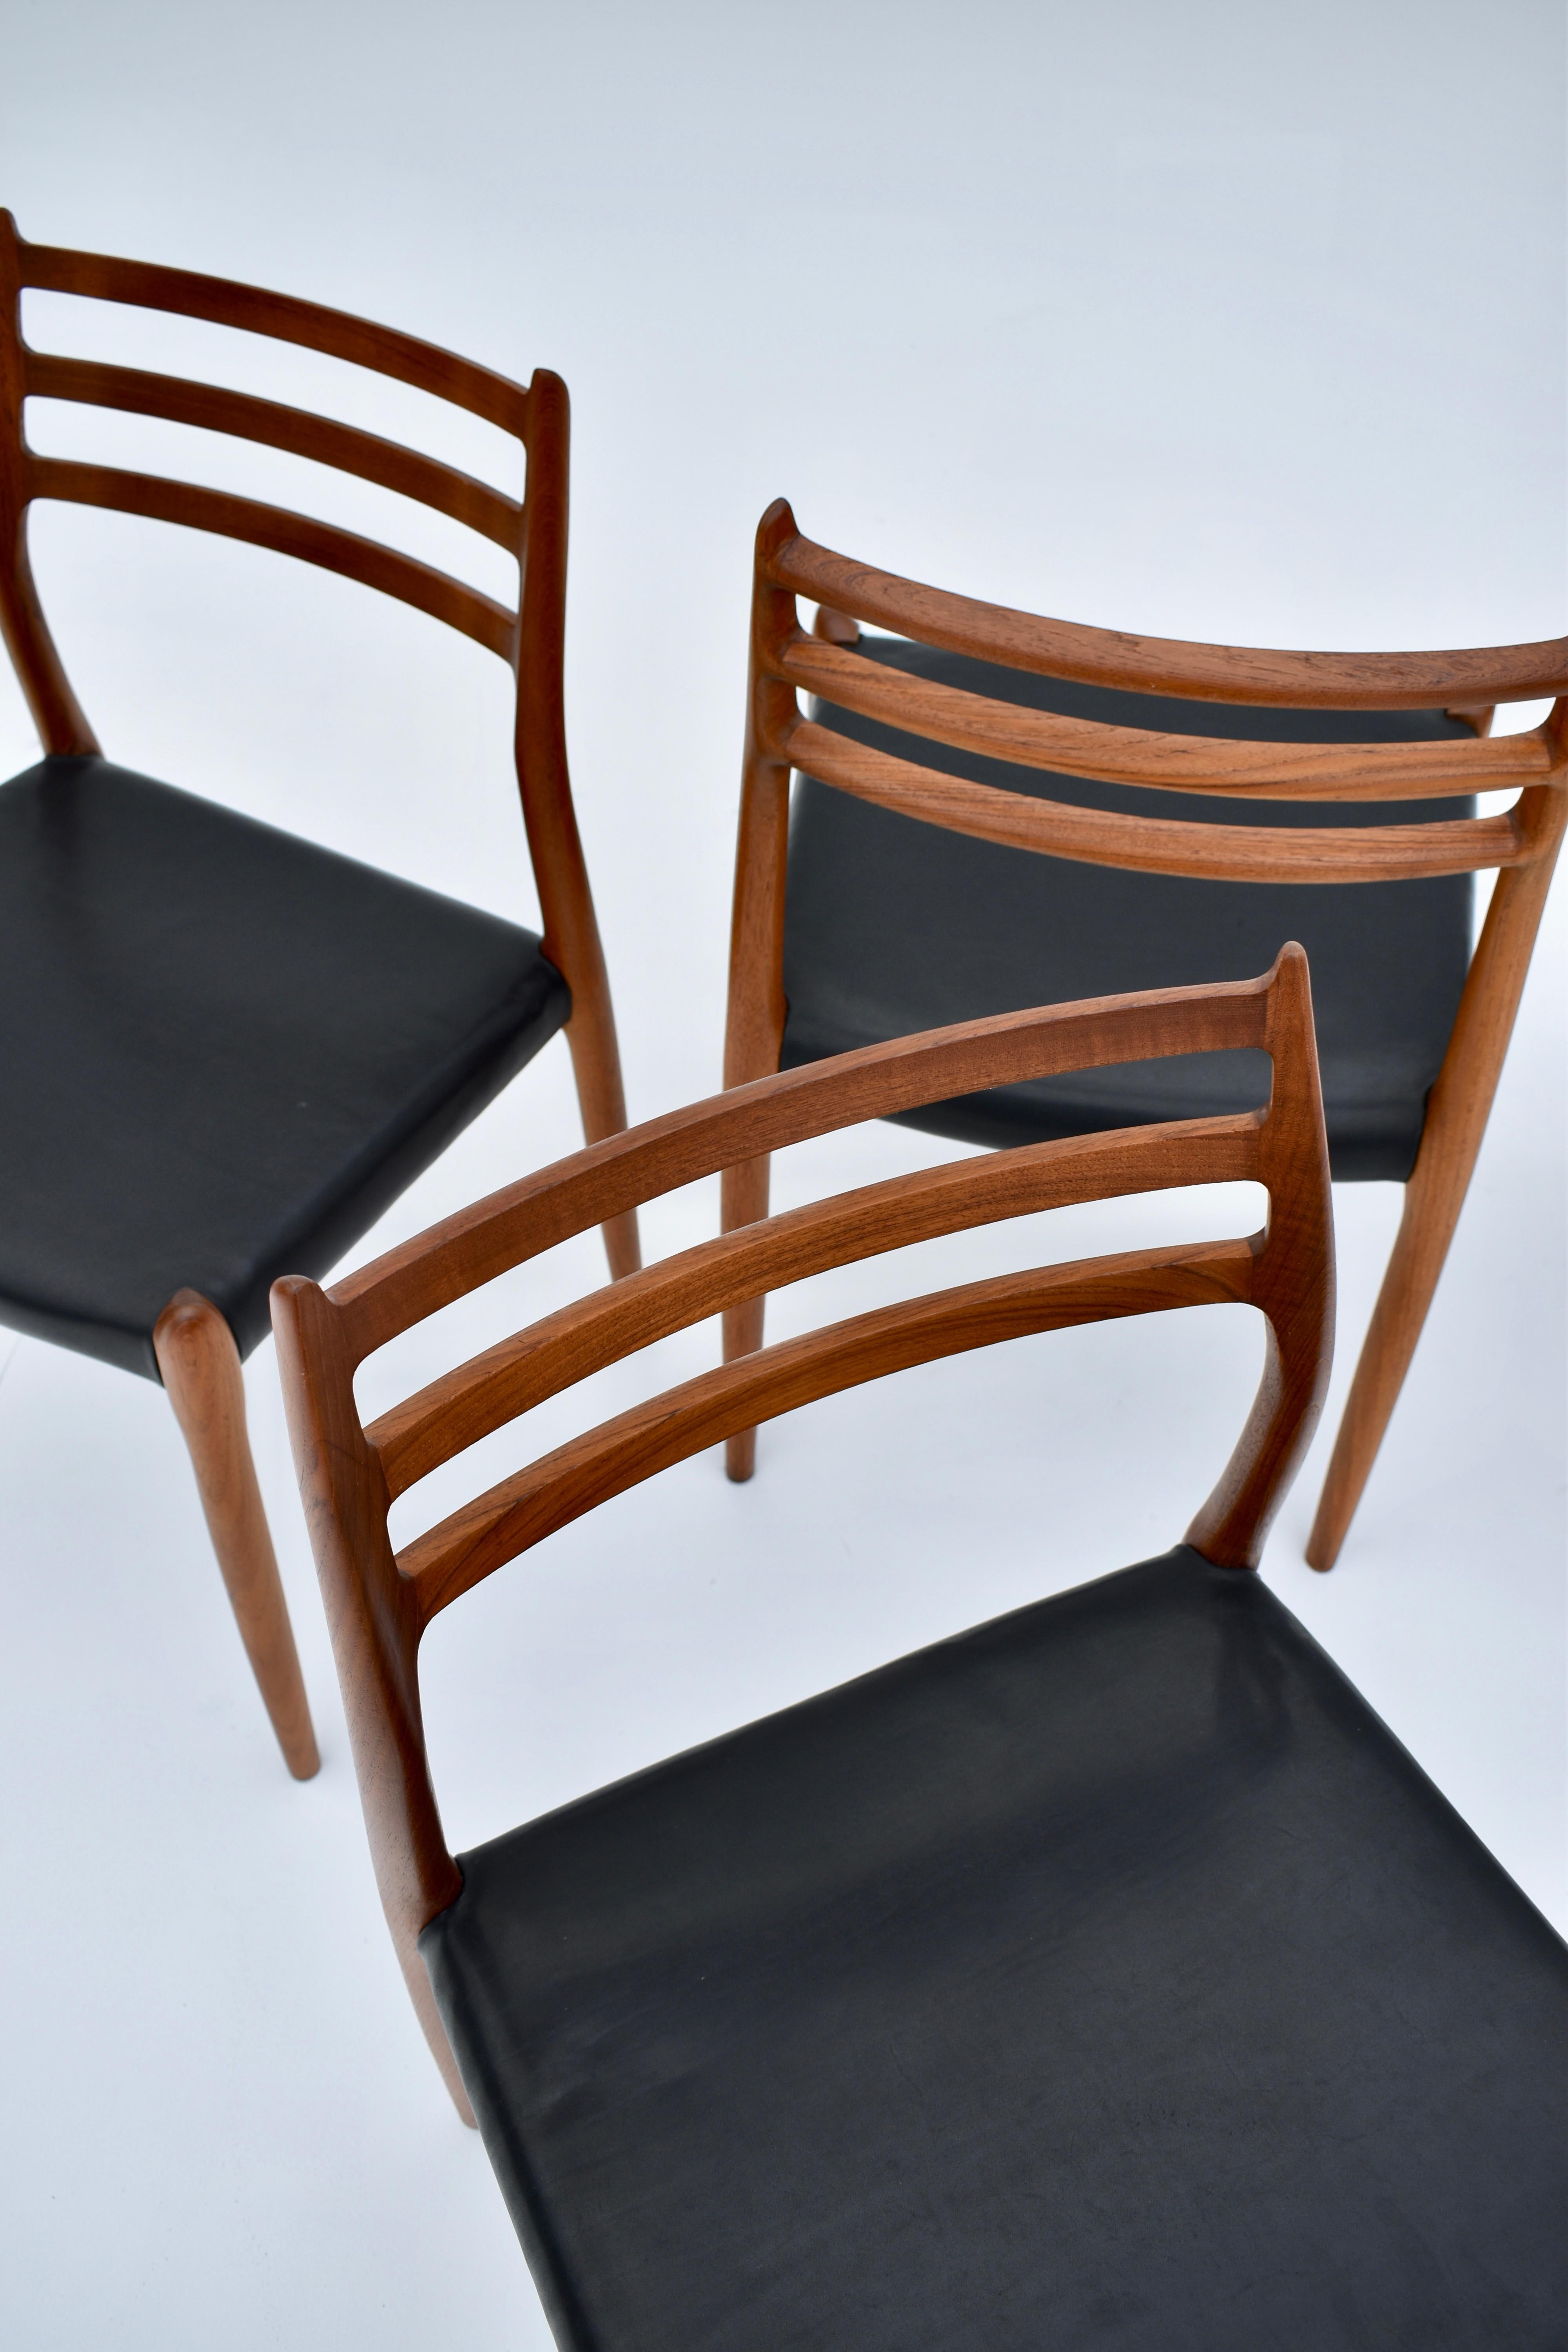 Leather Niels Moller Model 78 Teak Dining Chairs for J L Mollers Mobelfabrik